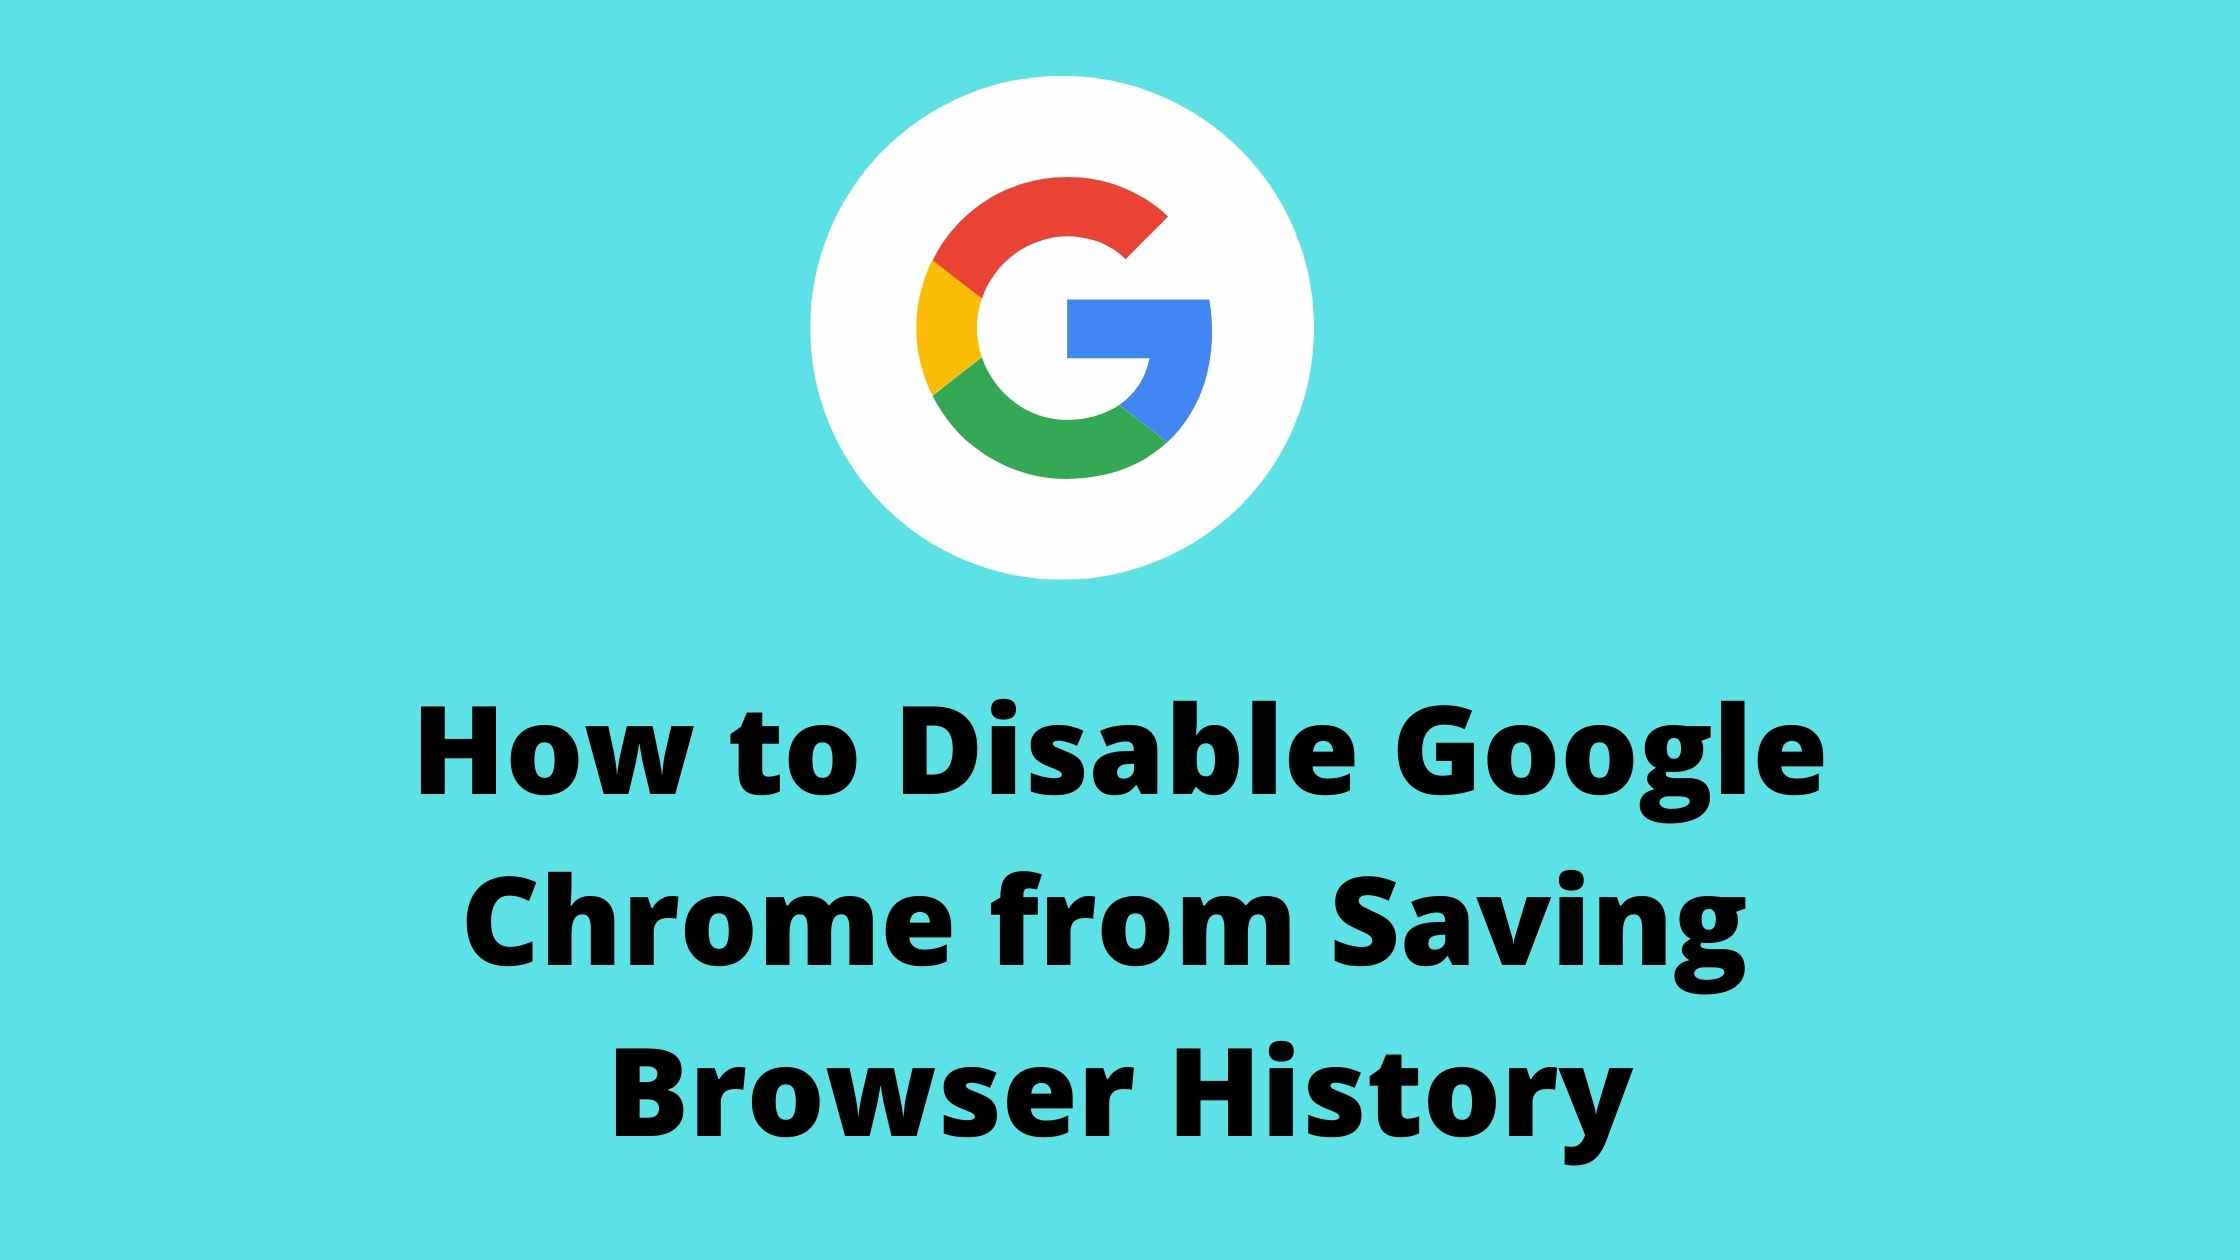 how to disable Google chrome from saving browsing history